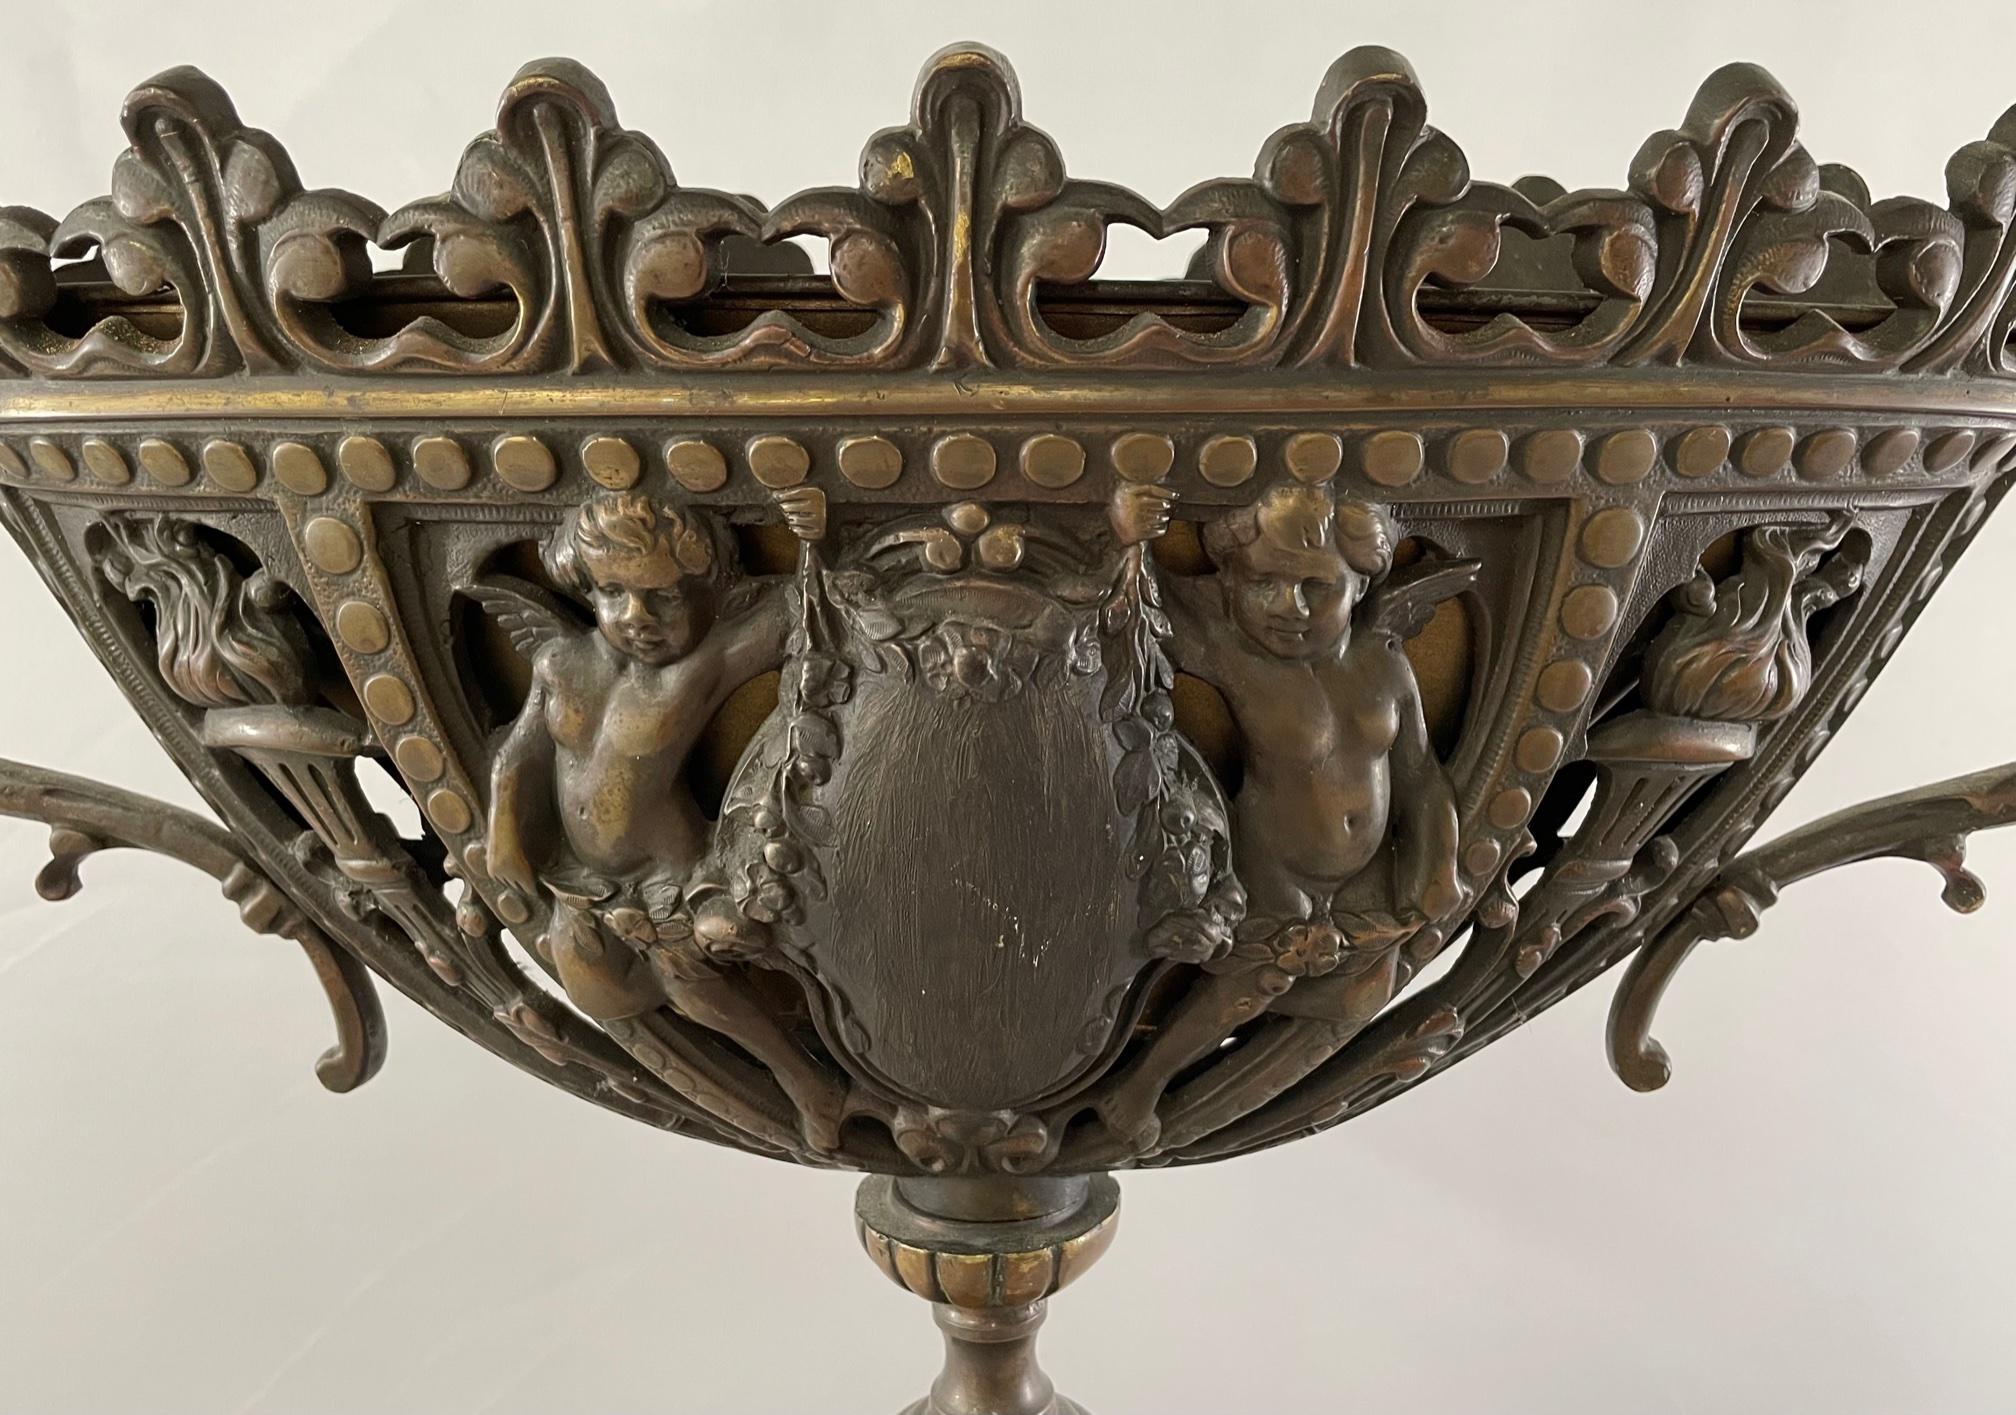 A 19th century antique French patinated bronze tri-pod vase or urn featuring cherubs, foliage and torches. The vase rim or mouth is finely crafted in acanthus motif. Timeless and classy, the vase or urn is a statement piece that will elevate any